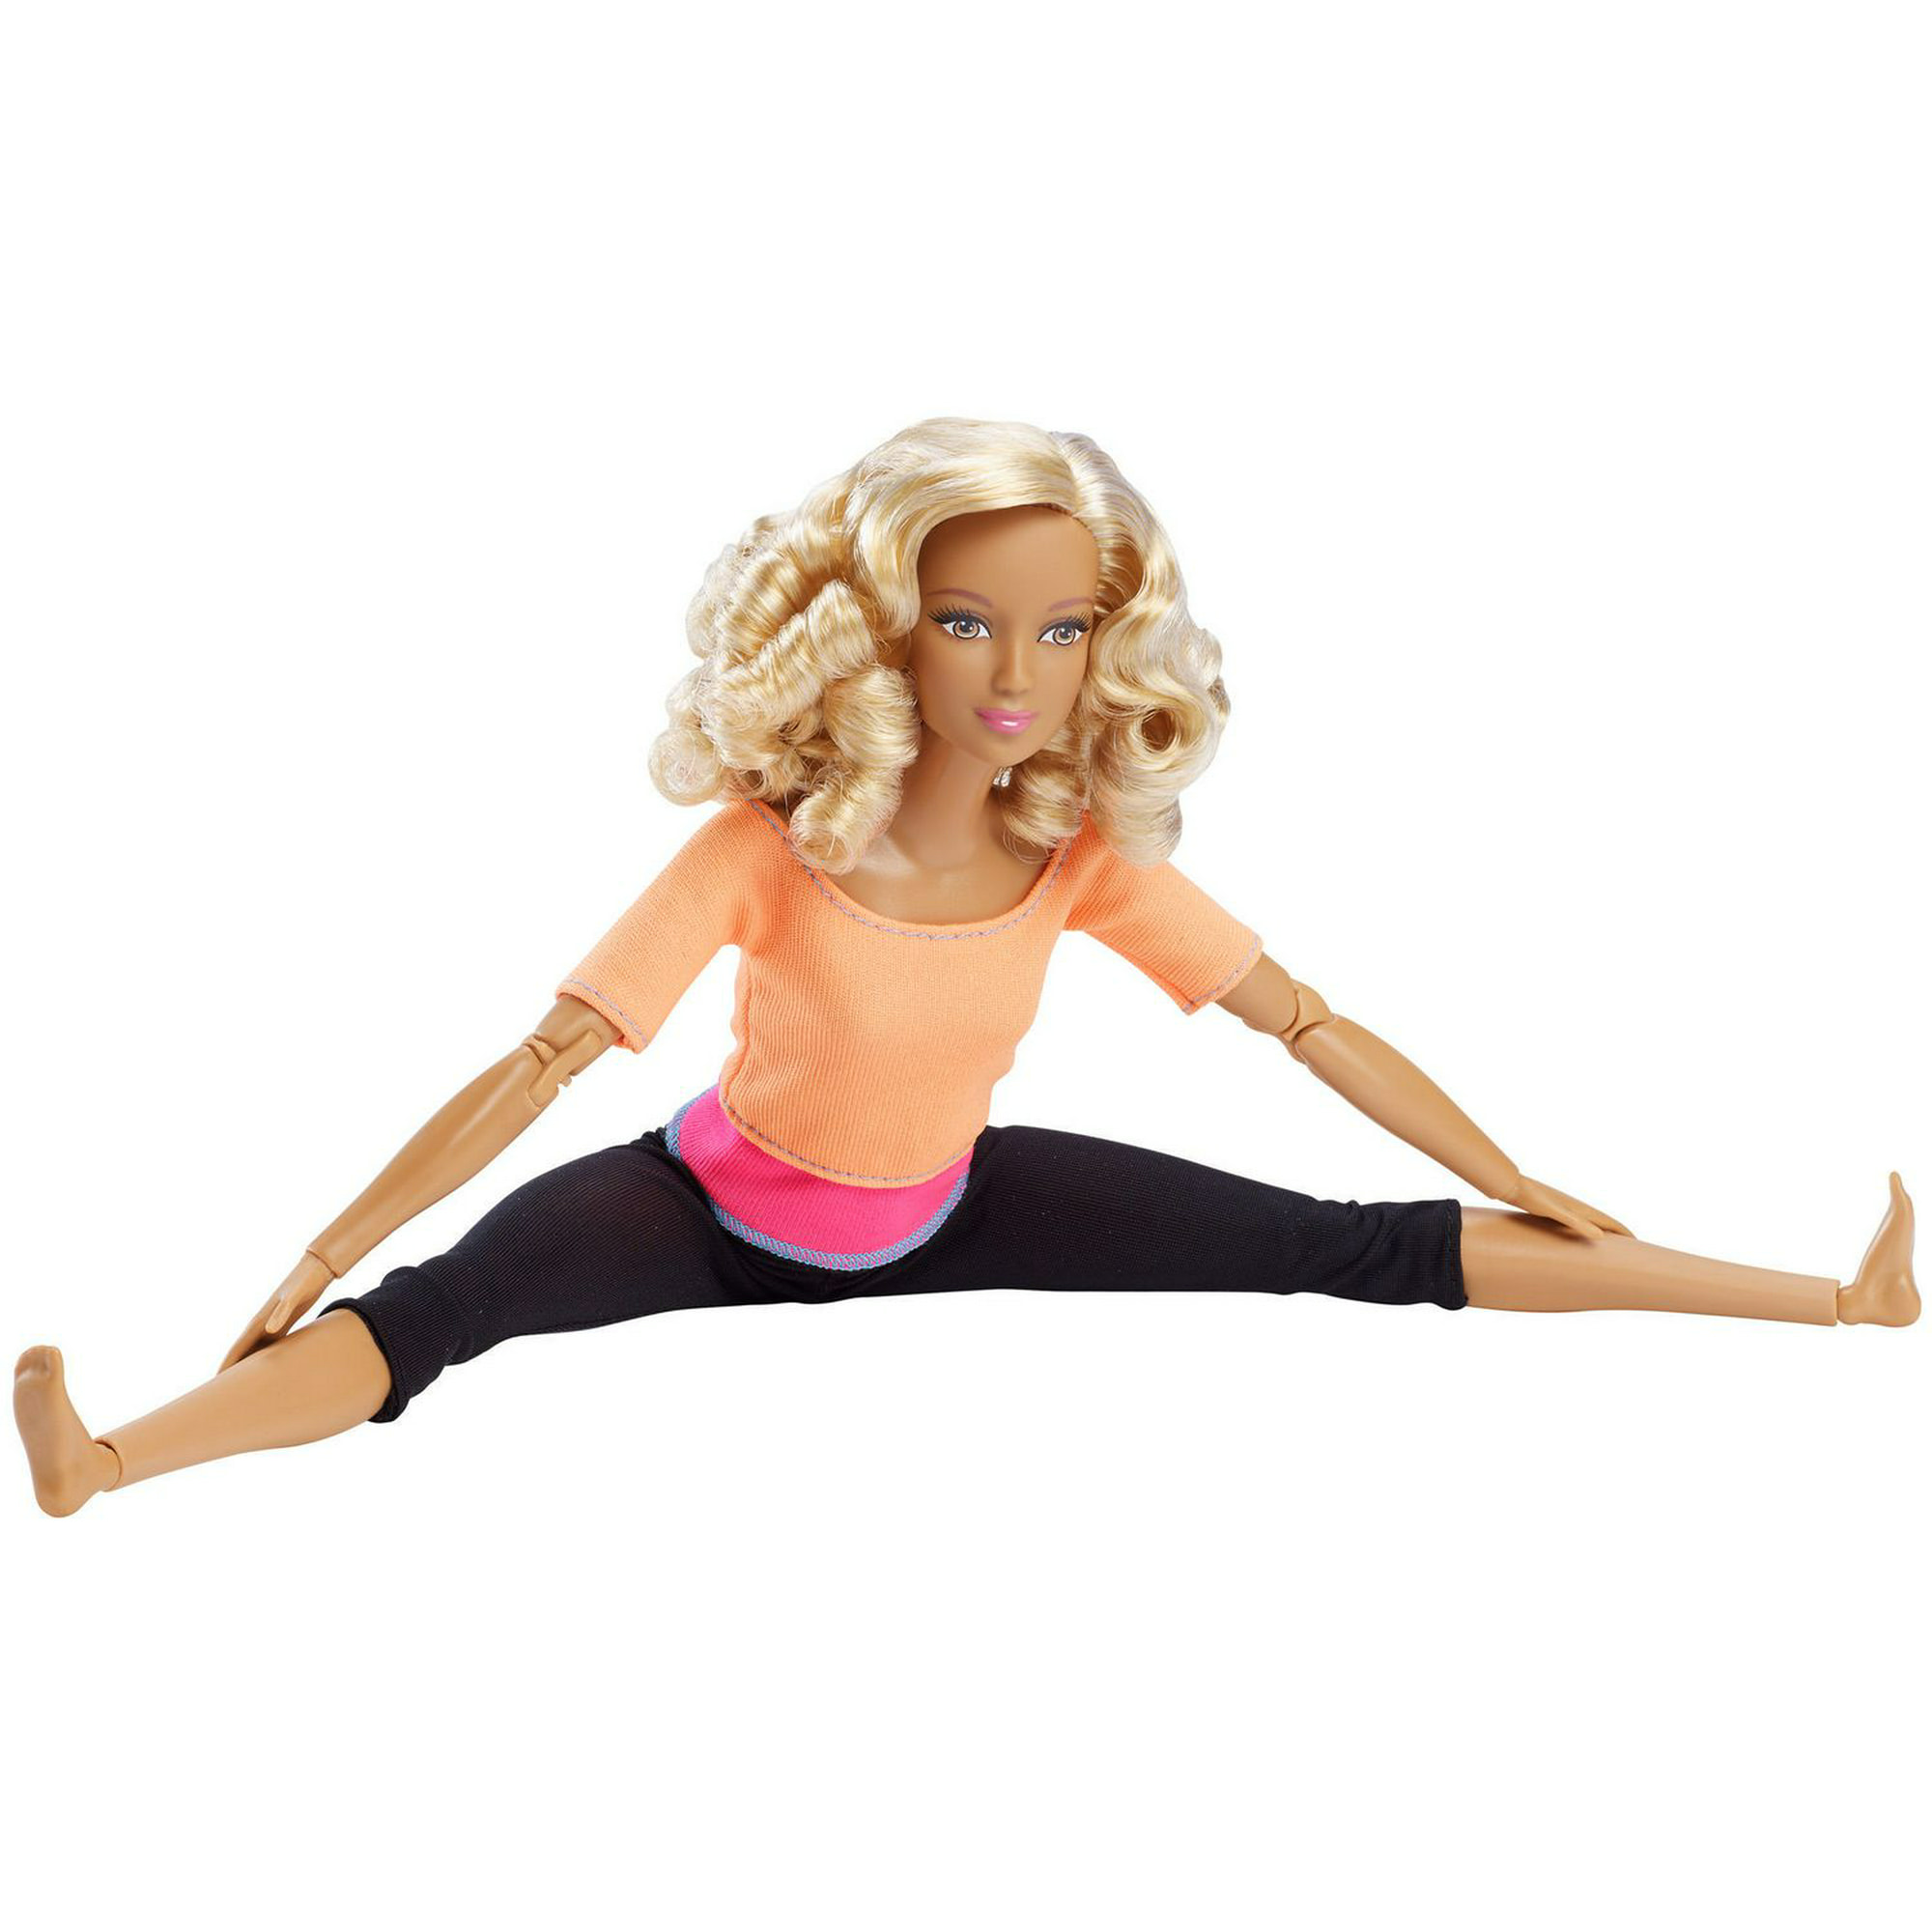 Made to Move Barbie Articulated Yoga Doll Blond Mattel with Dress